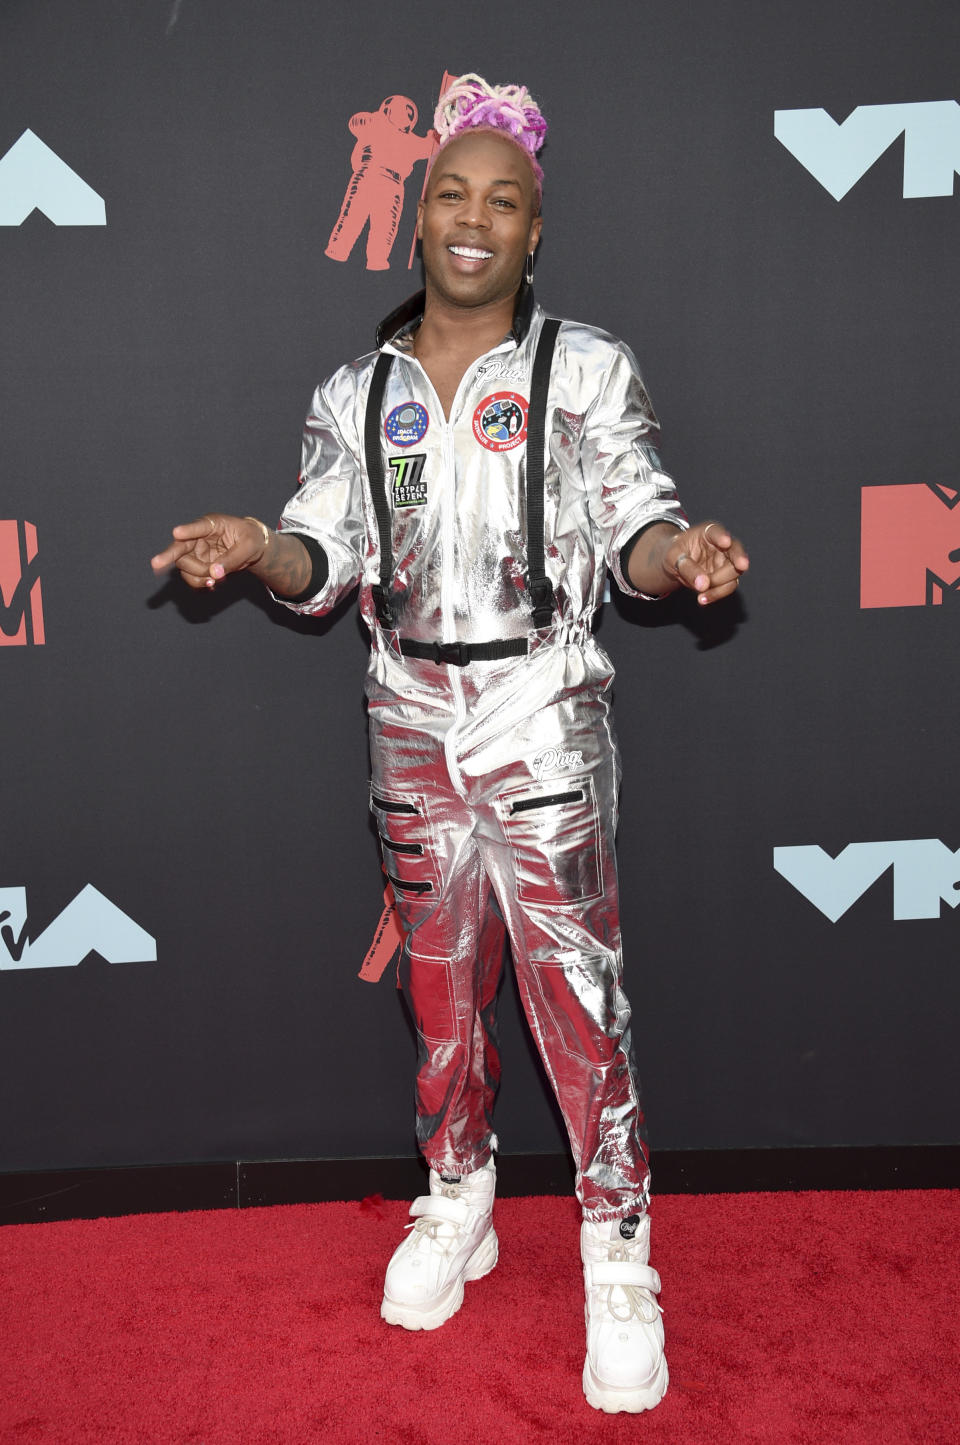 Todrick Hall arrives at the MTV Video Music Awards at the Prudential Center on Monday, Aug. 26, 2019, in Newark, N.J. (Photo by Evan Agostini/Invision/AP)